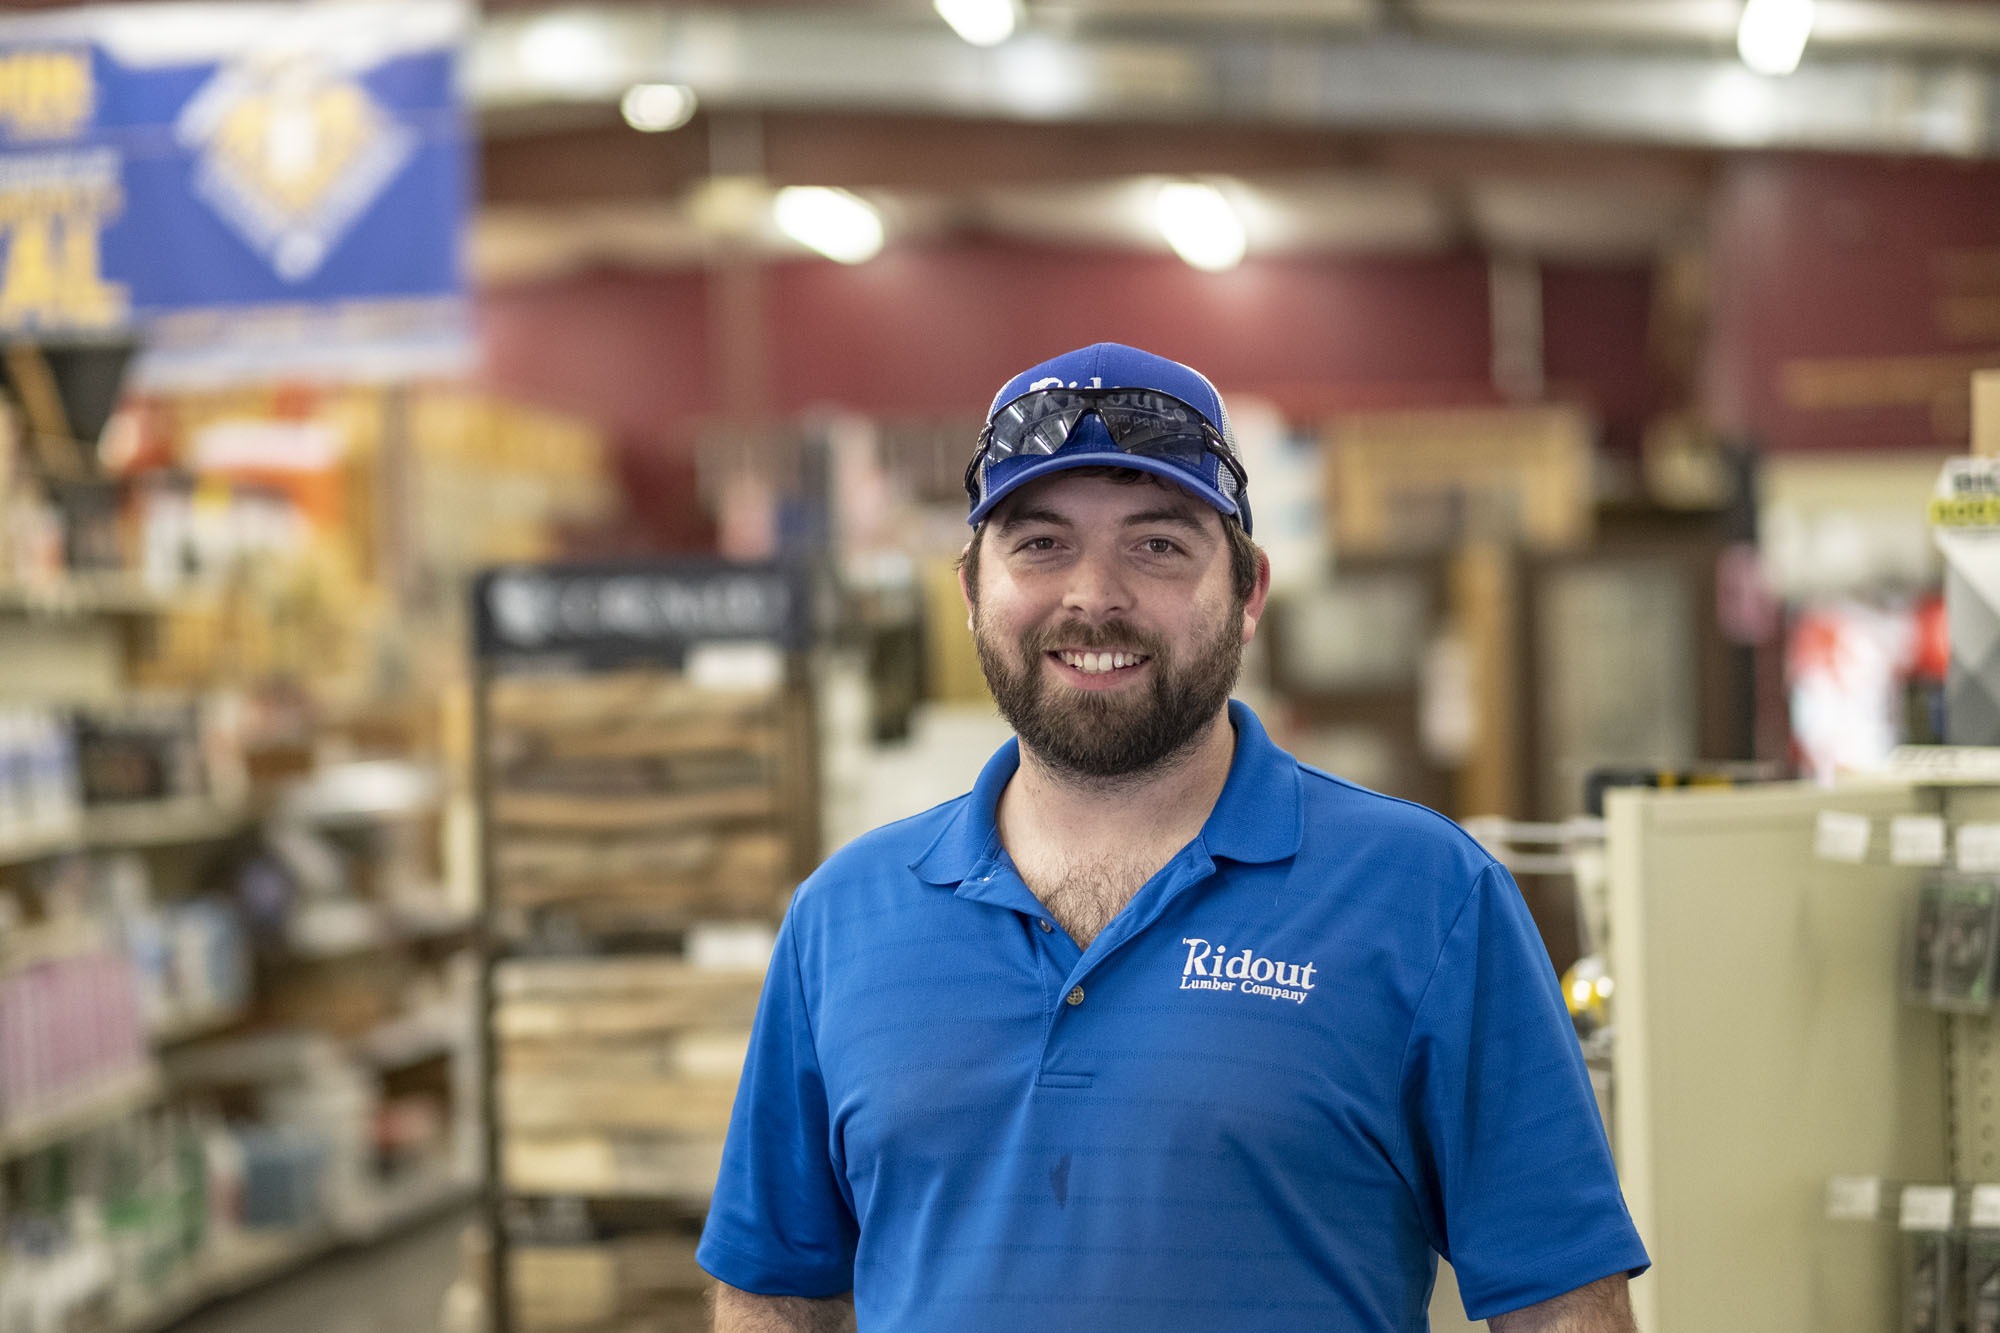 Ridout Lumber employee ready to serve customers in store